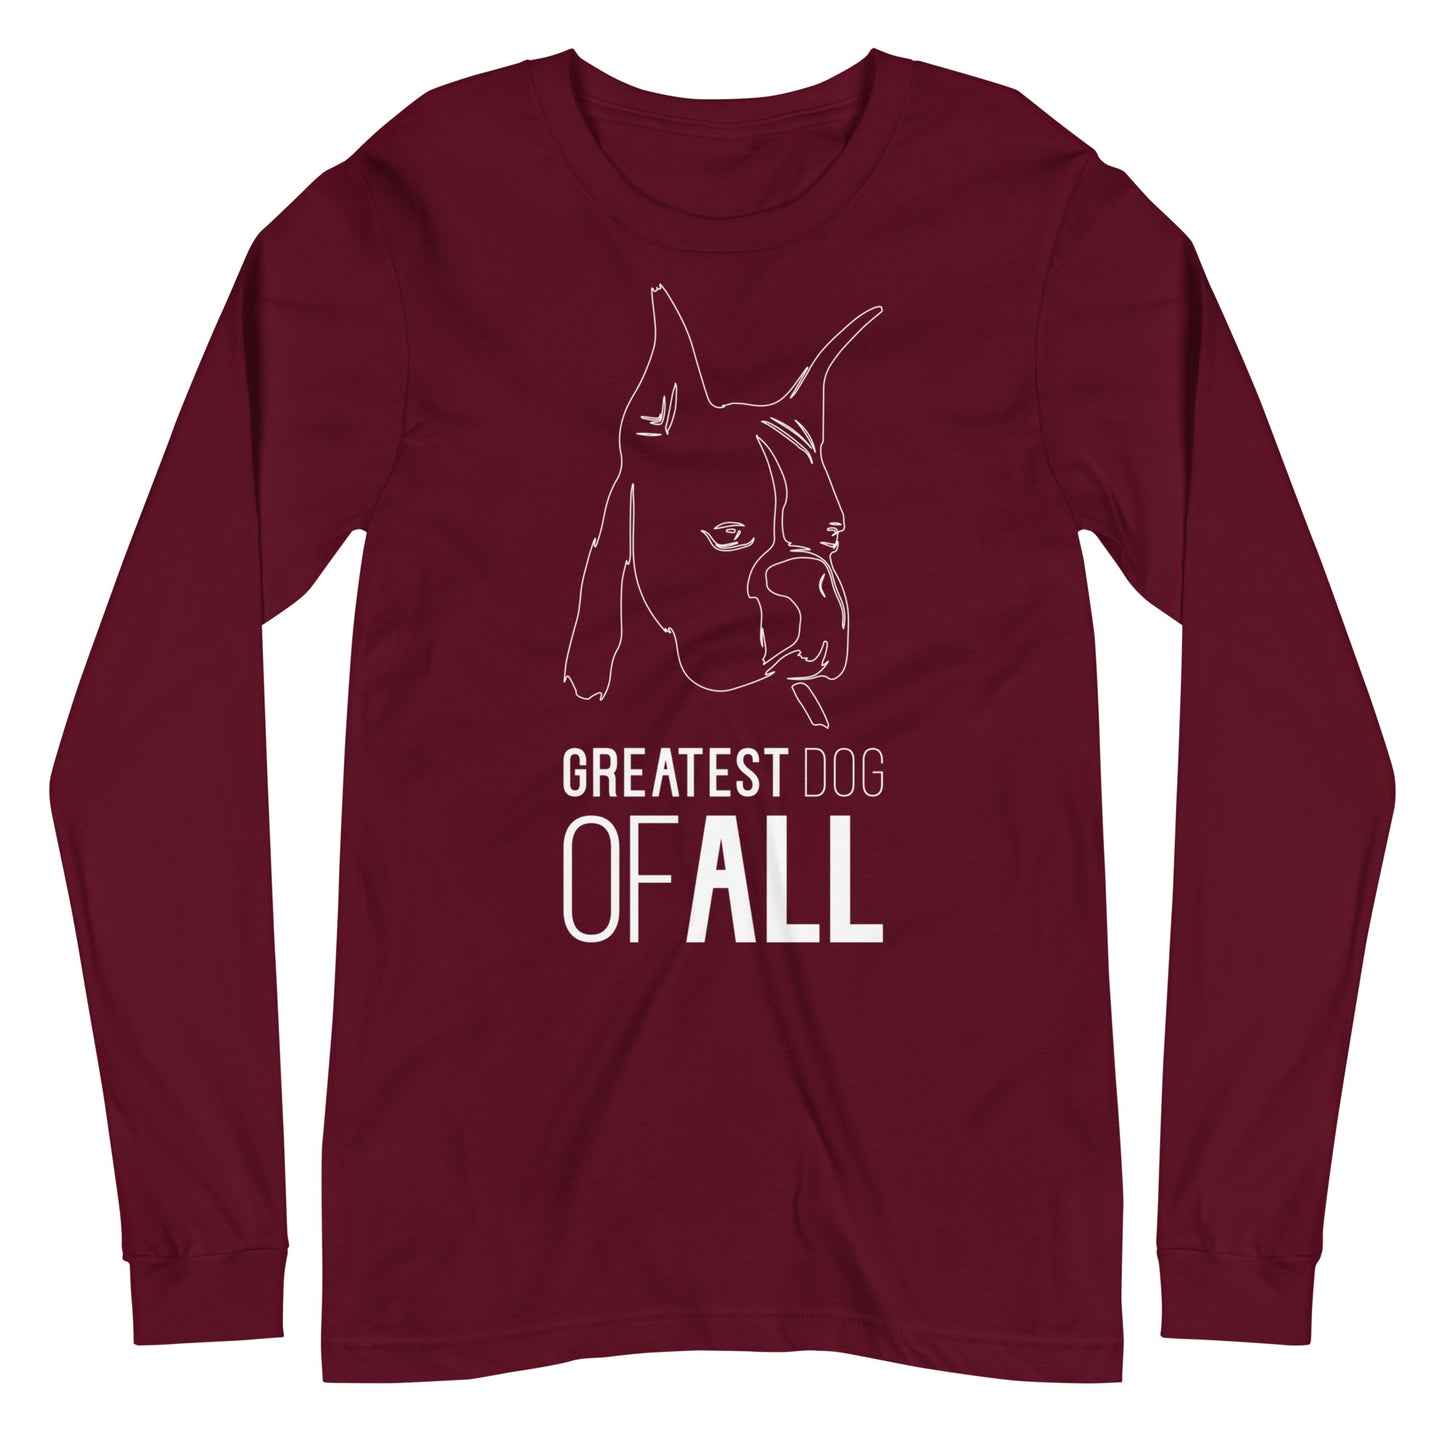 White line Boxer face with Greatest Dog of All caption on unisex maroon long sleeve t-shirt